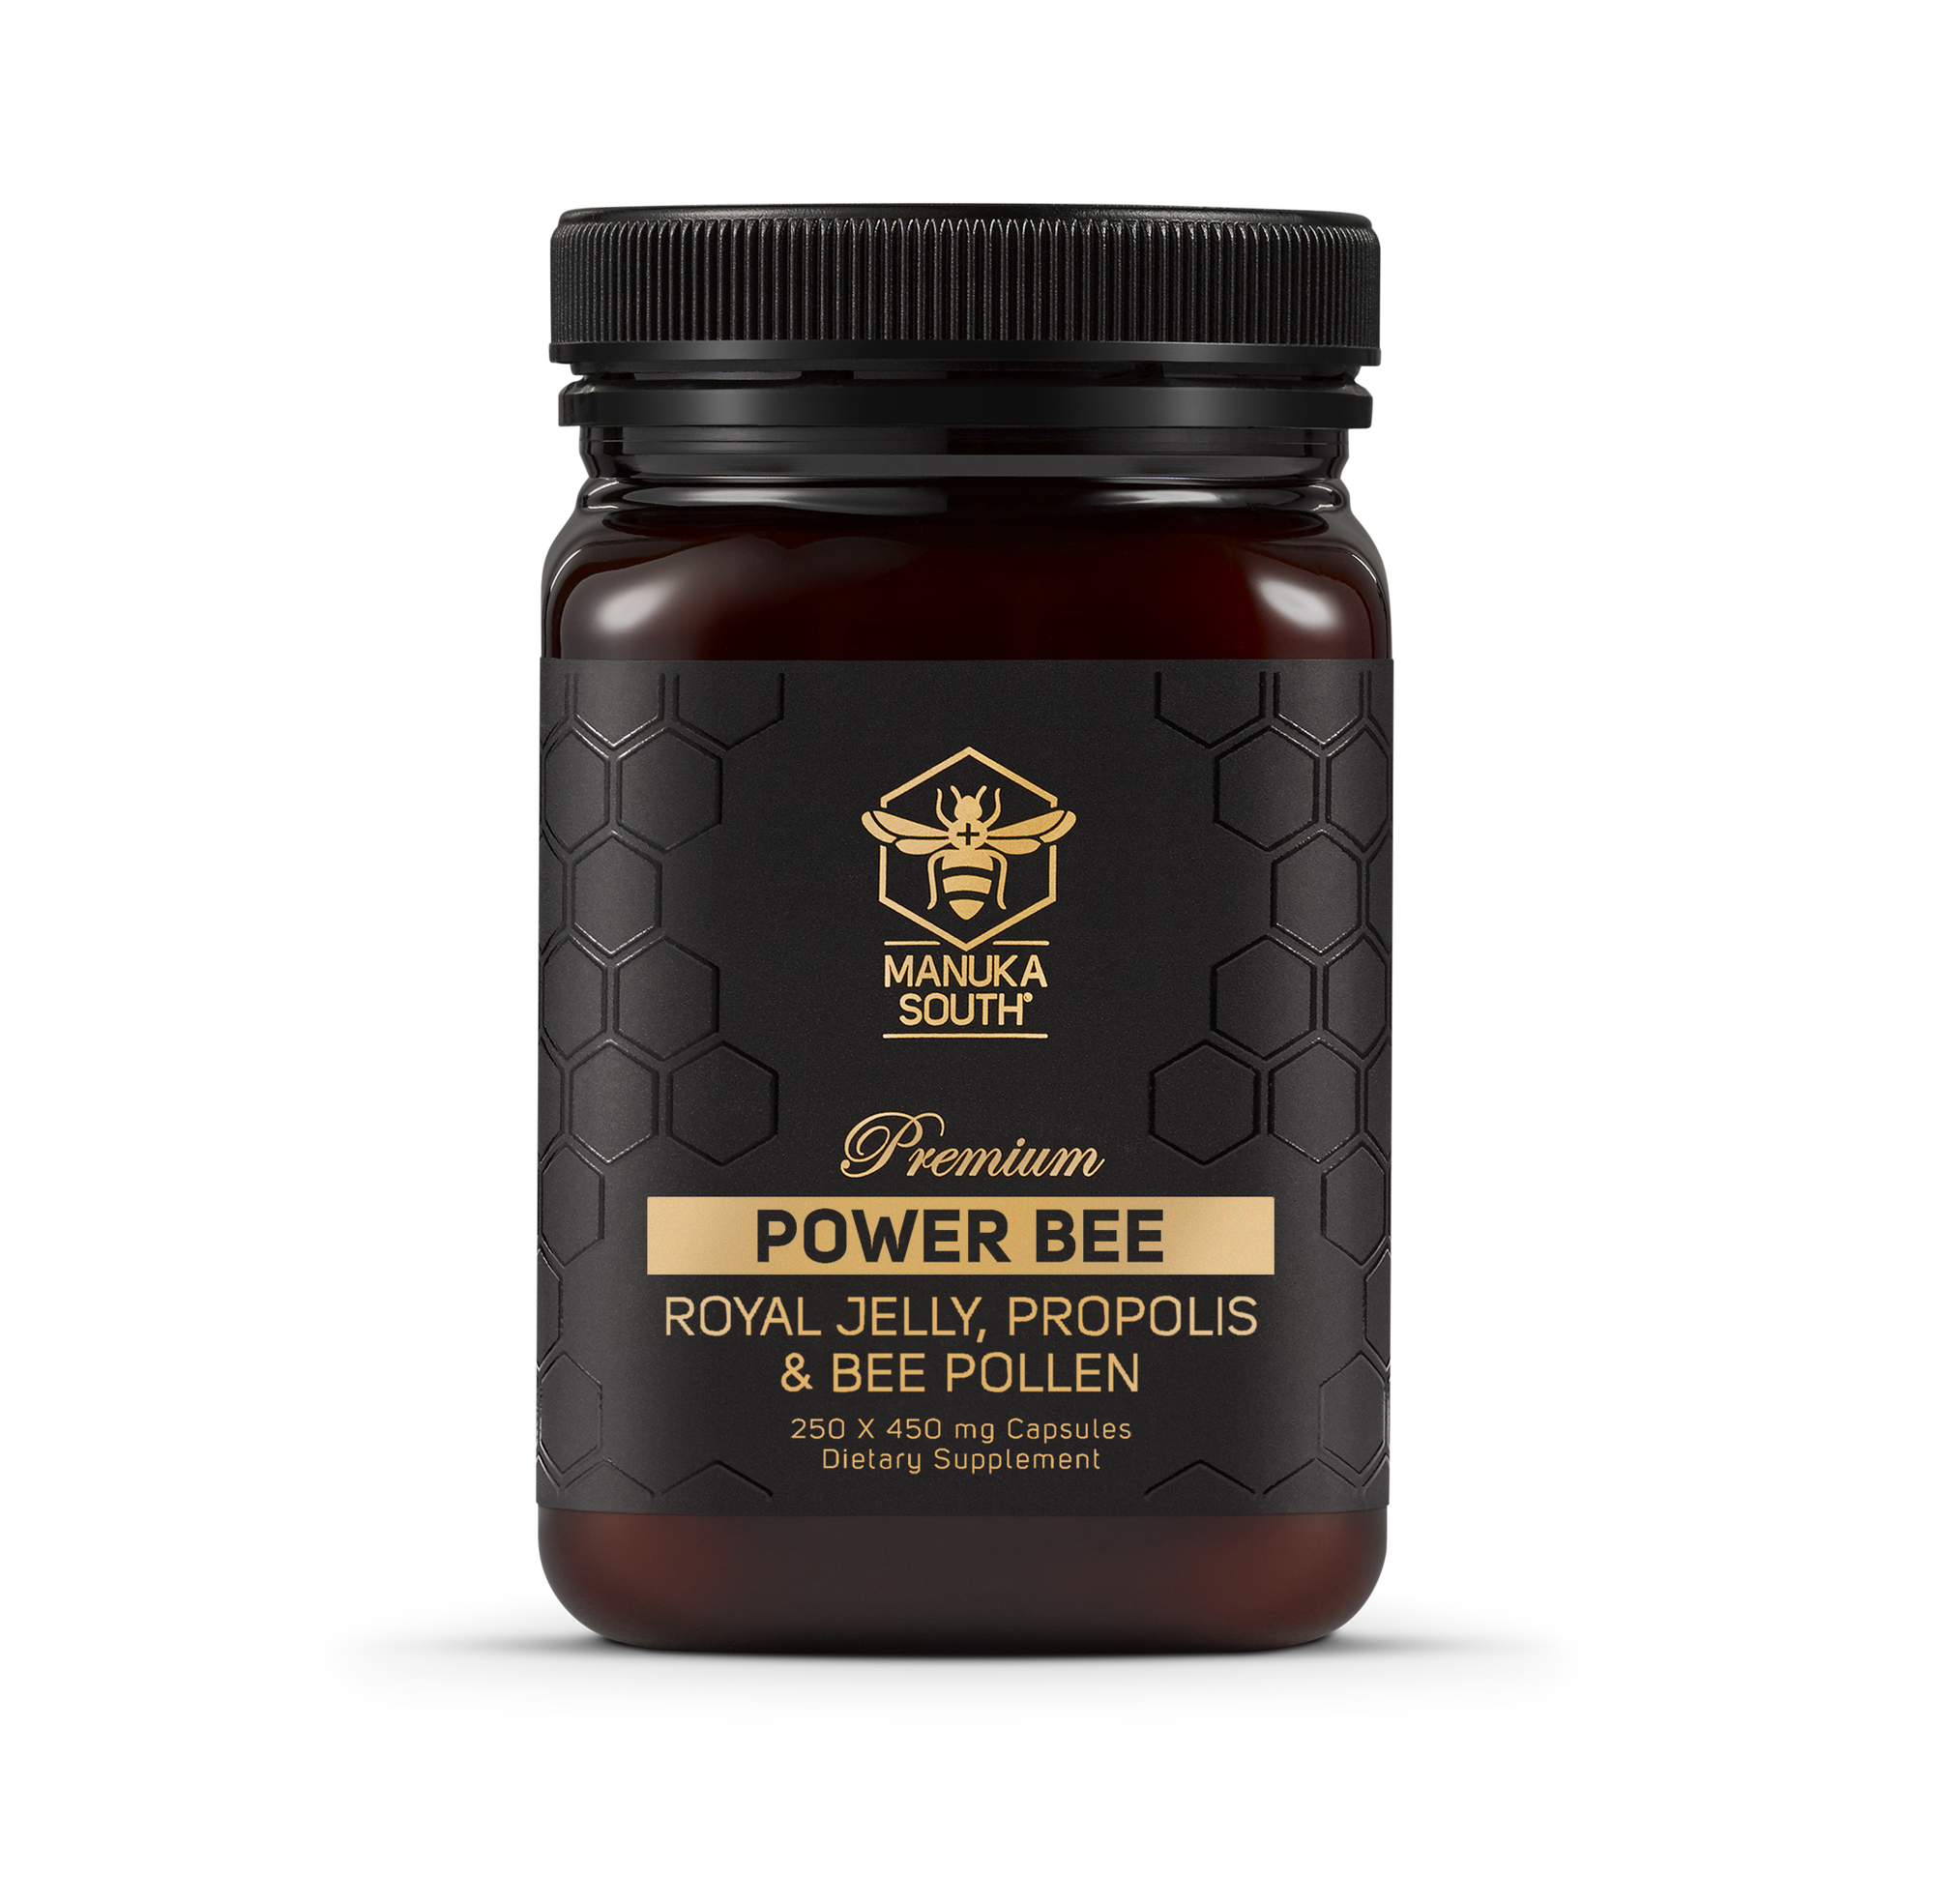 Power Bee with Royal Jelly, Propolis & Bee Pollen